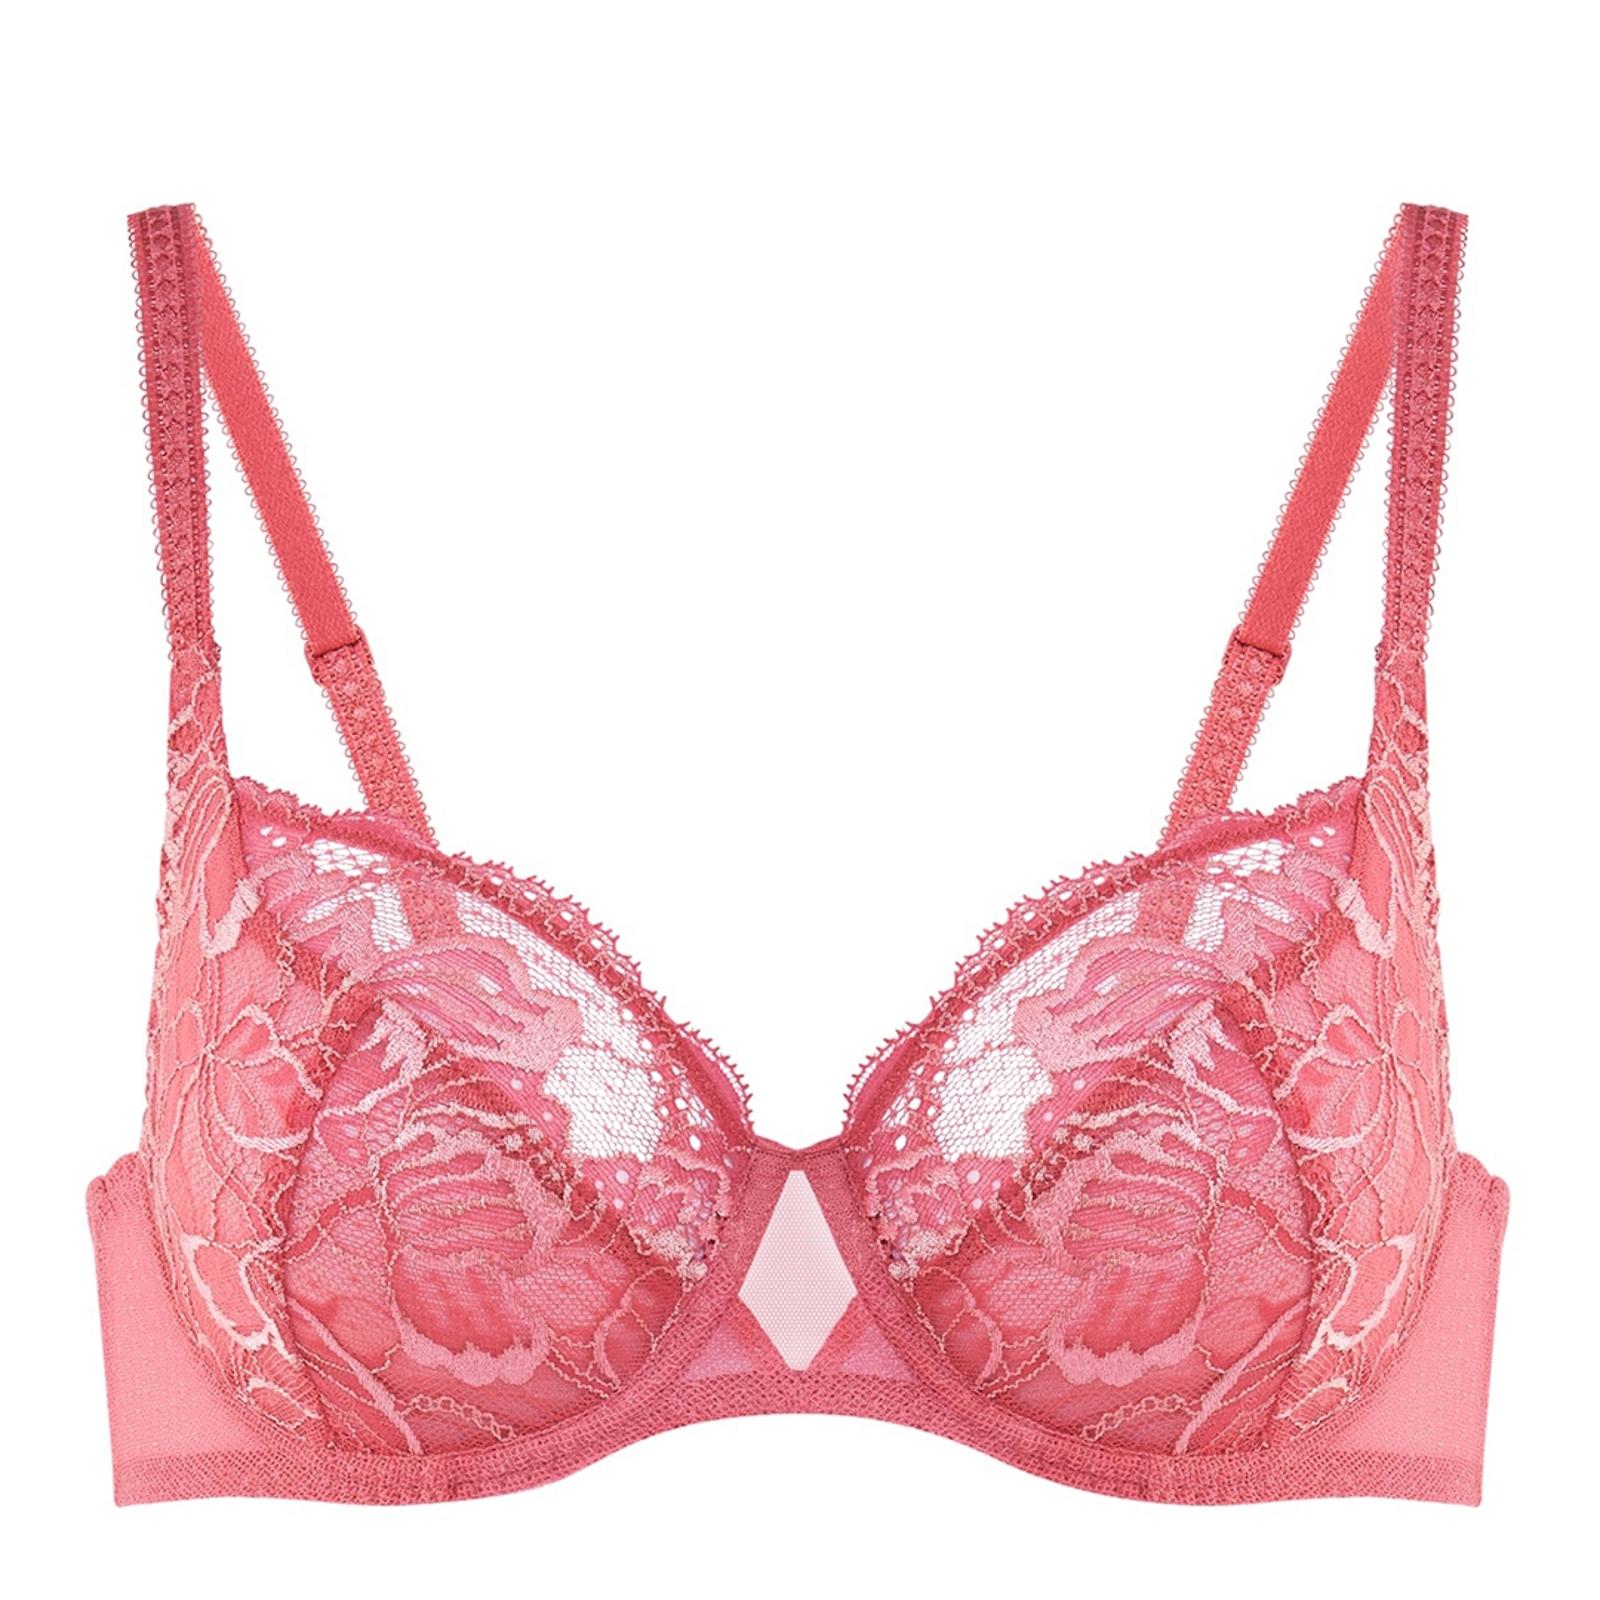 Blush Promesse Full Cup Support Bra - BrandAlley